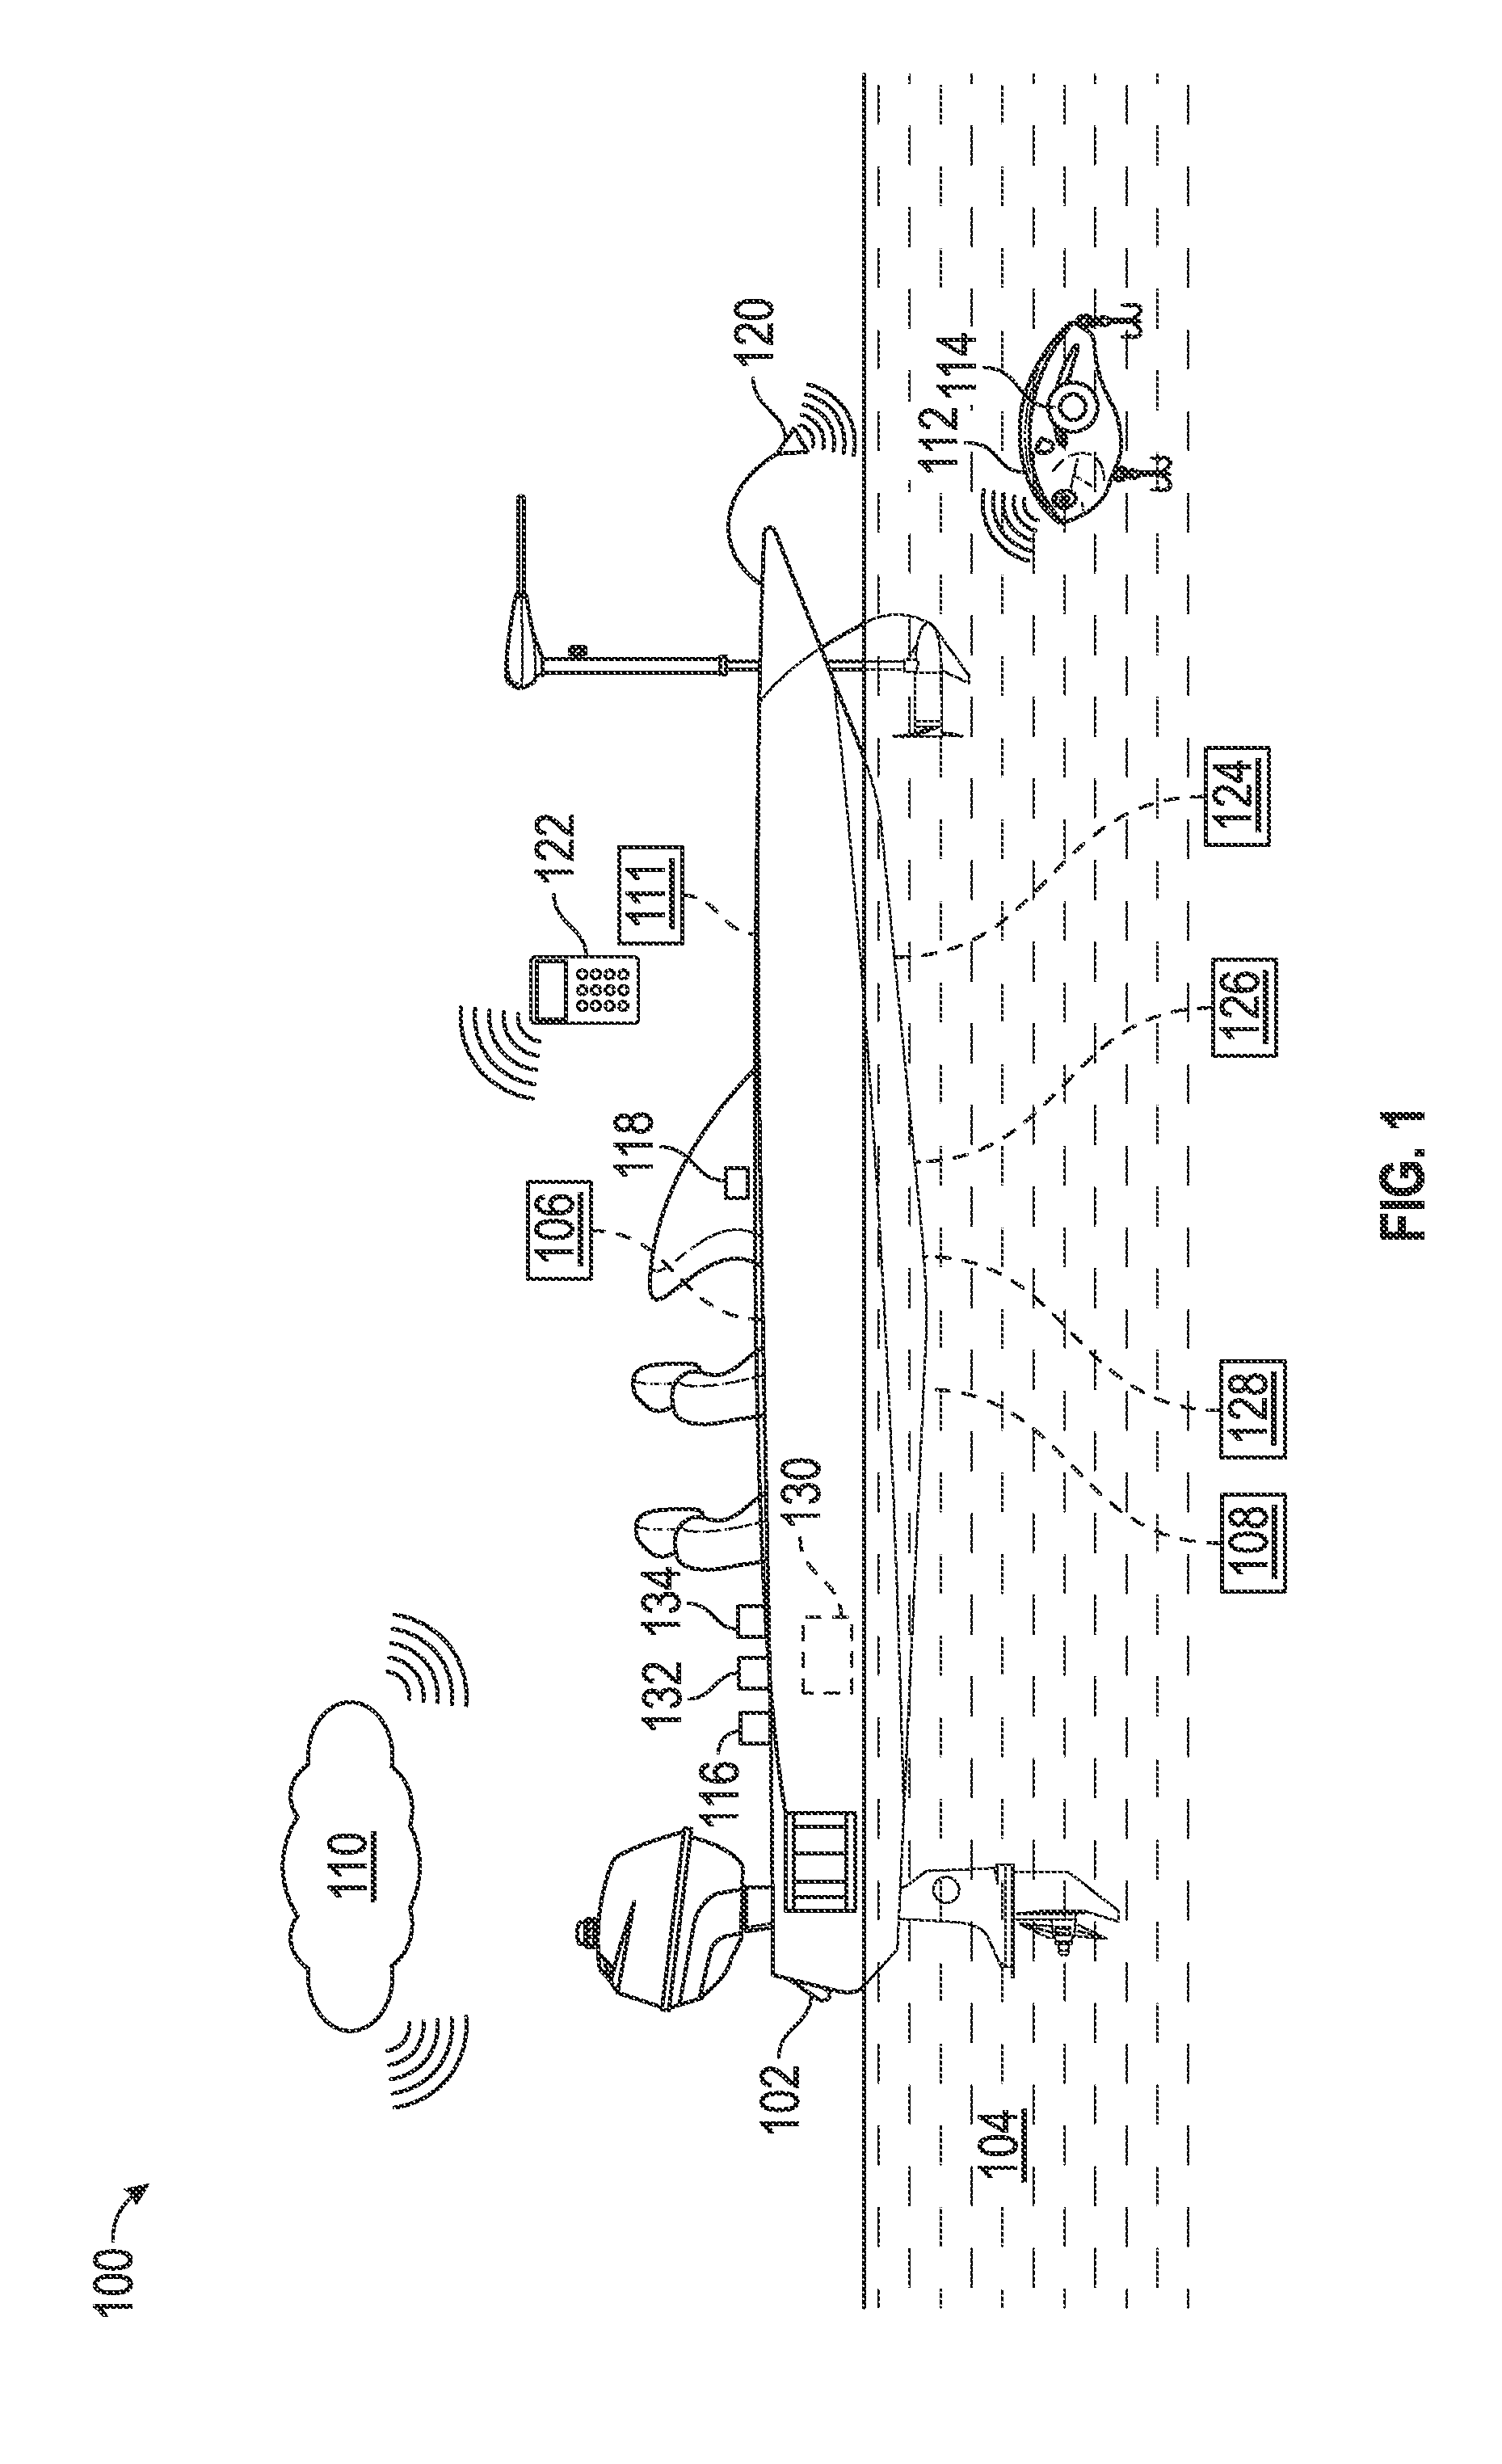 Systems and methods for automated fish culling